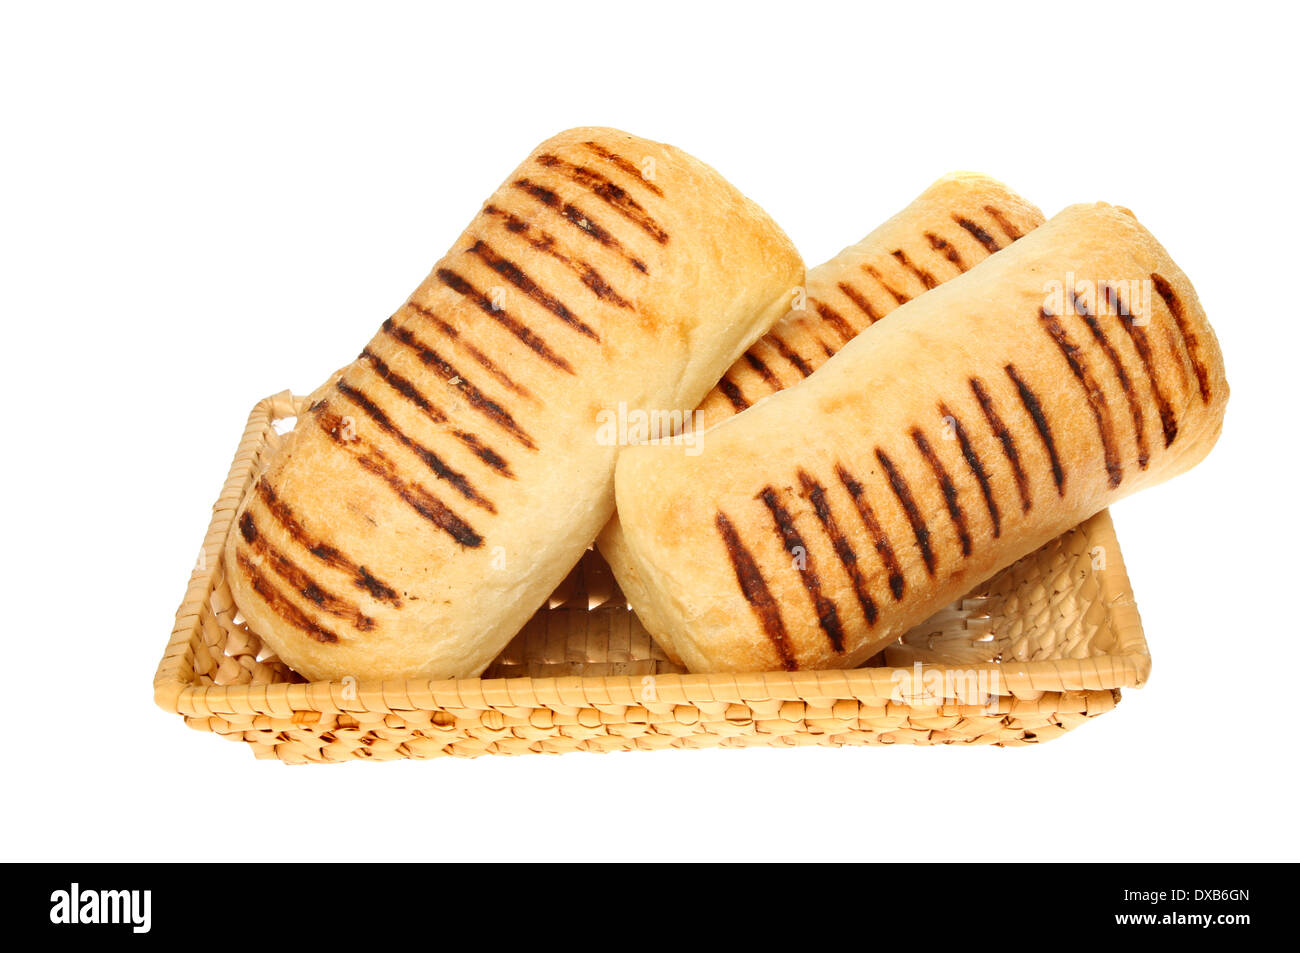 Panini bread rolls in a wicker basket isolated against white Stock Photo